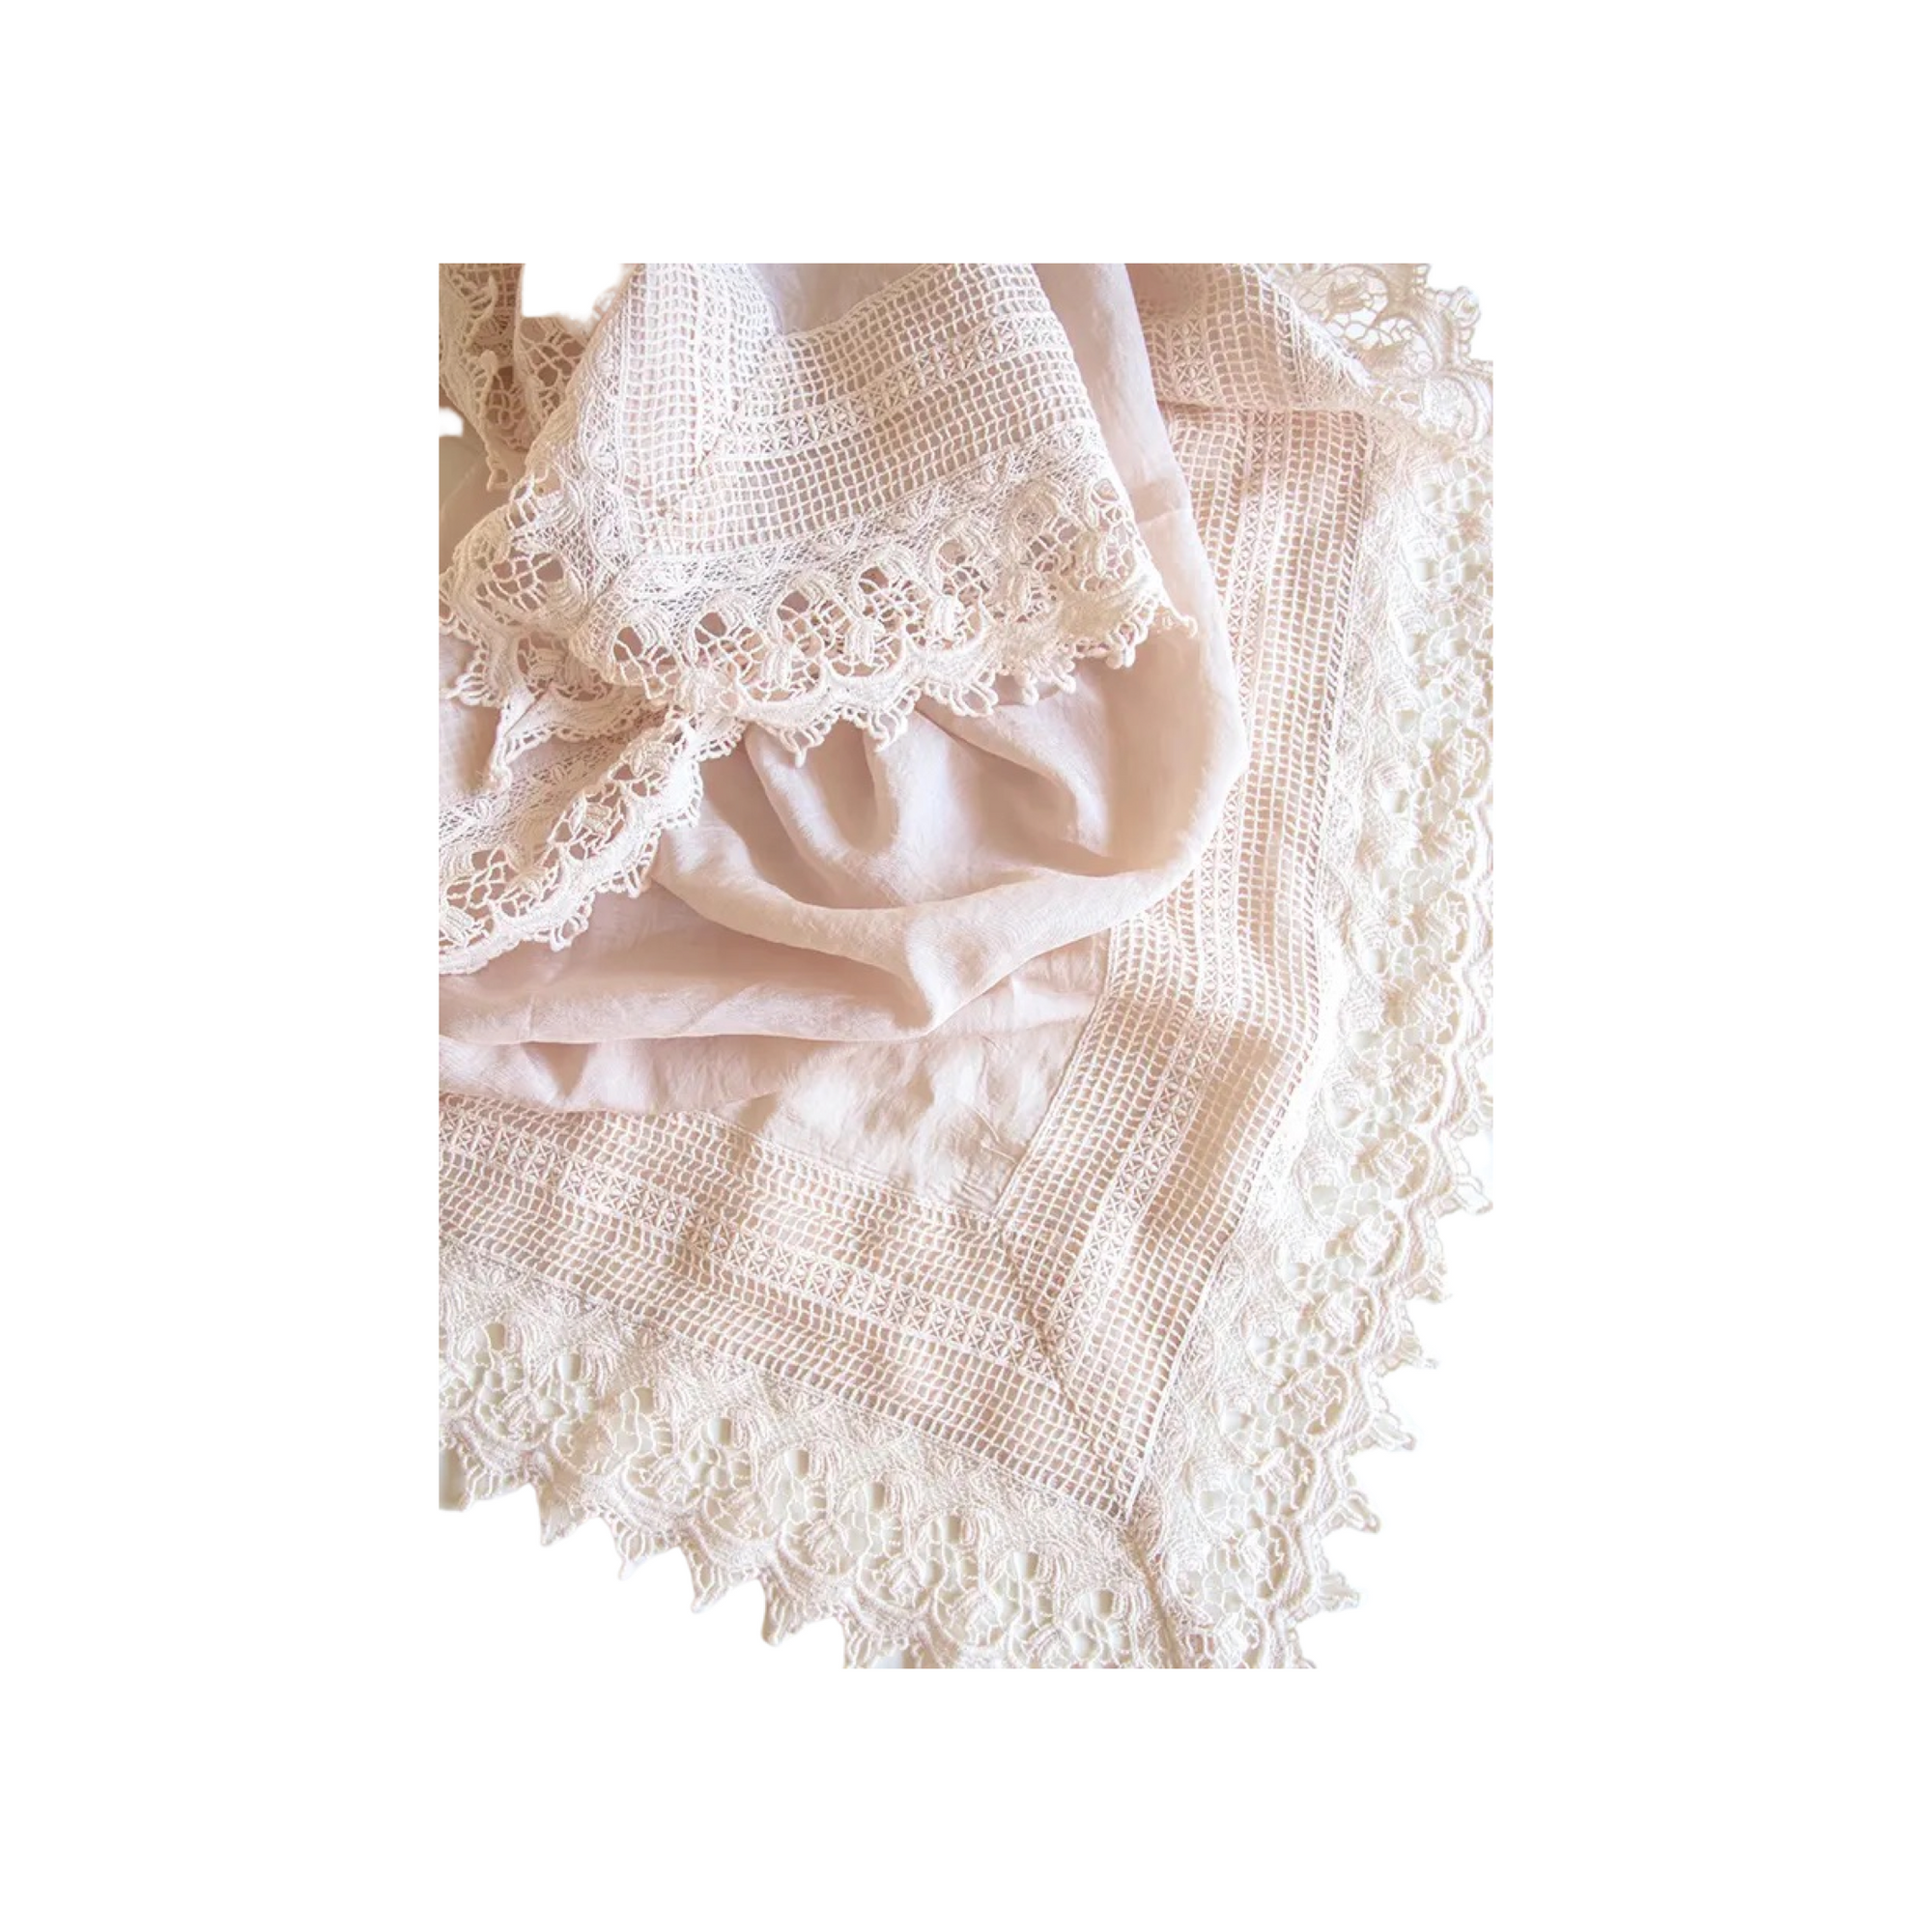 Silk & Lace Heirloom Swaddles